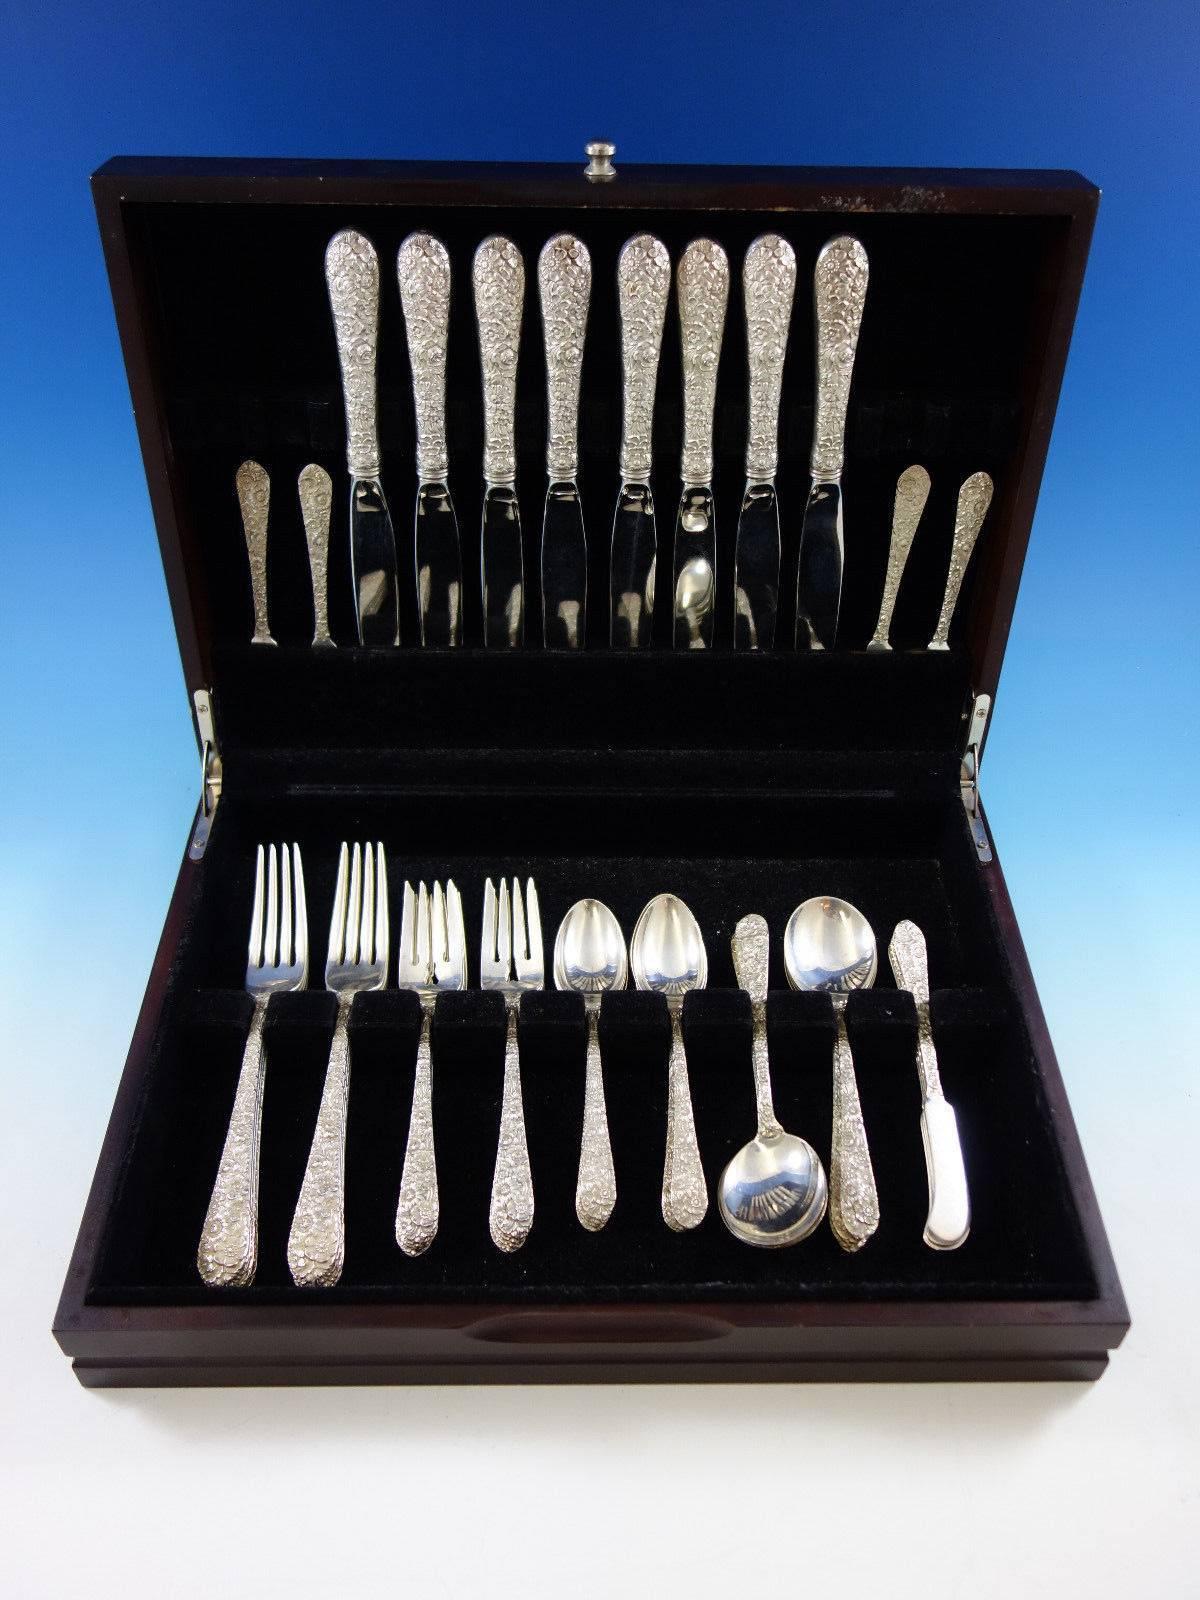 Dinner size bridal bouquet by Alvin repousse sterling silver flatware set, 48 pieces. This set includes: 

eight dinner size knives, 9 5/8